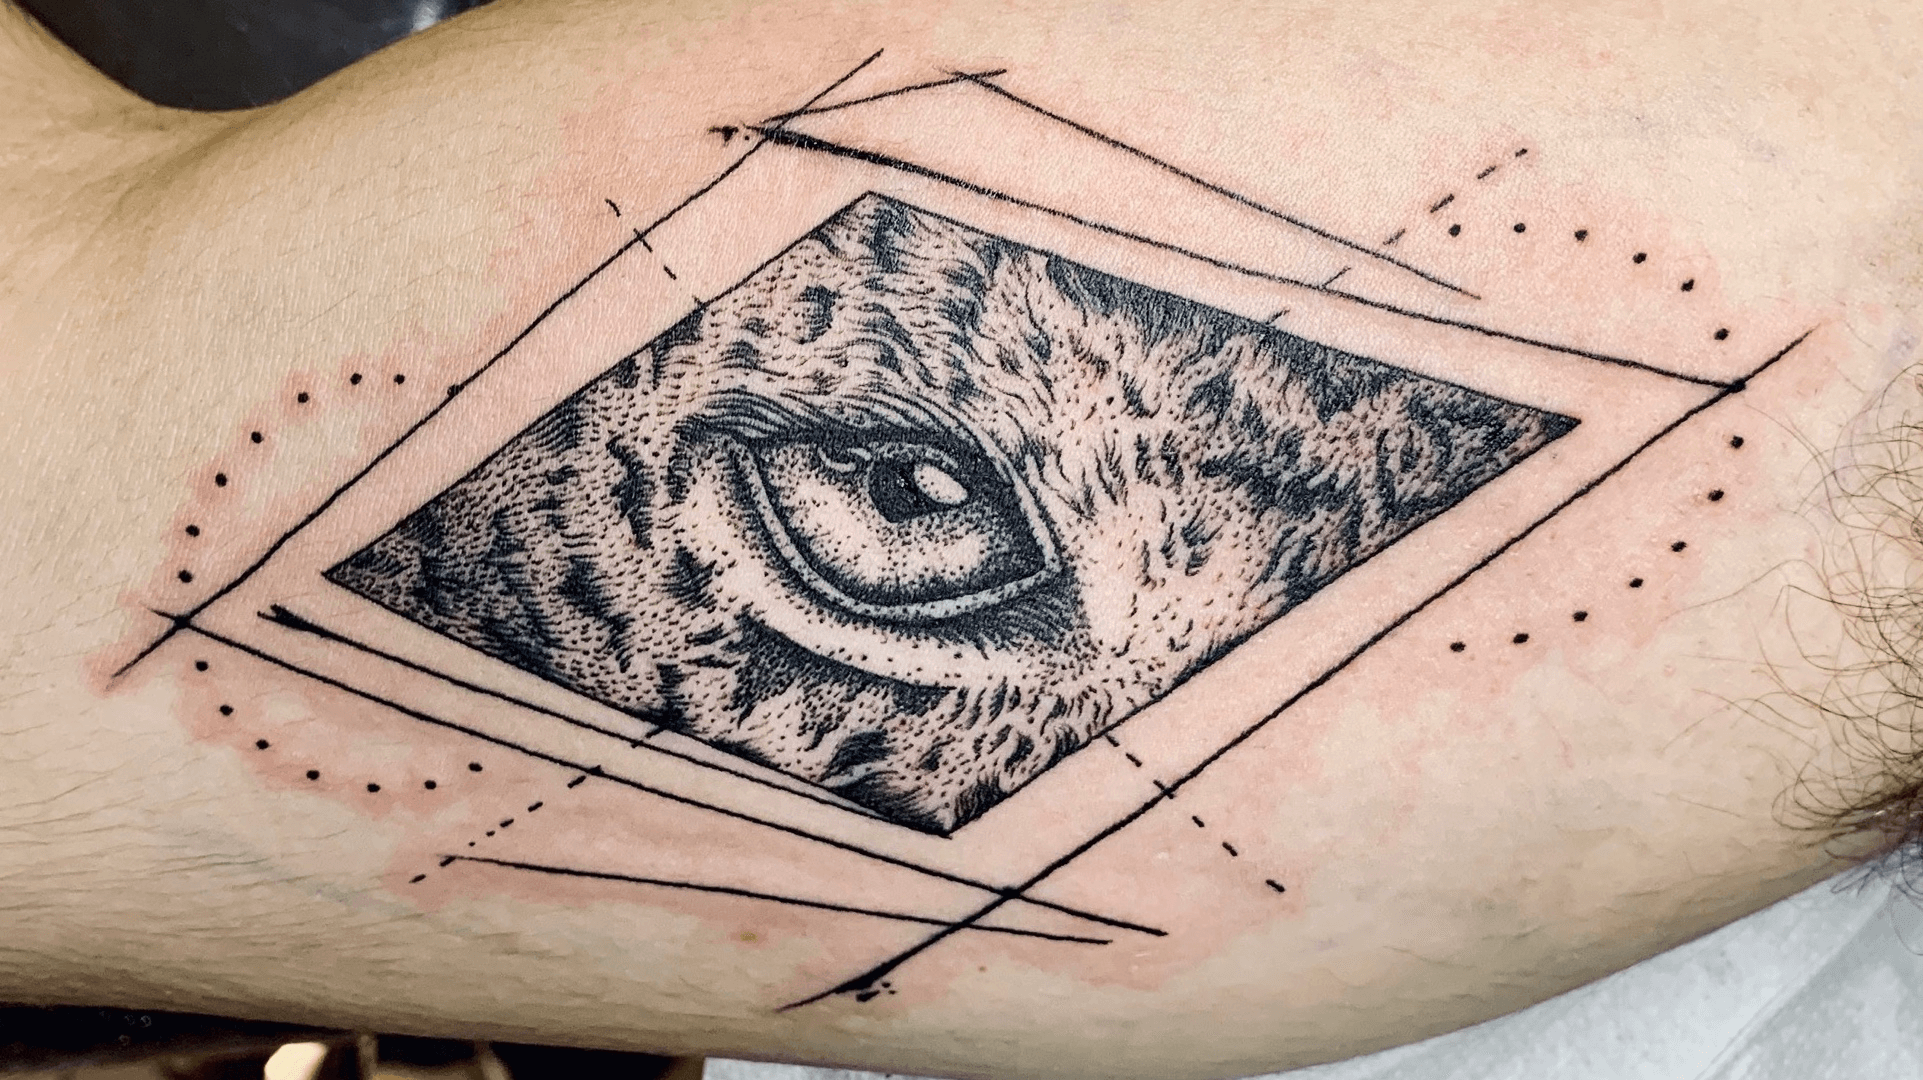 Tattoo uploaded by Aaron Sanchez • Eye of the tiger! • Tattoodo